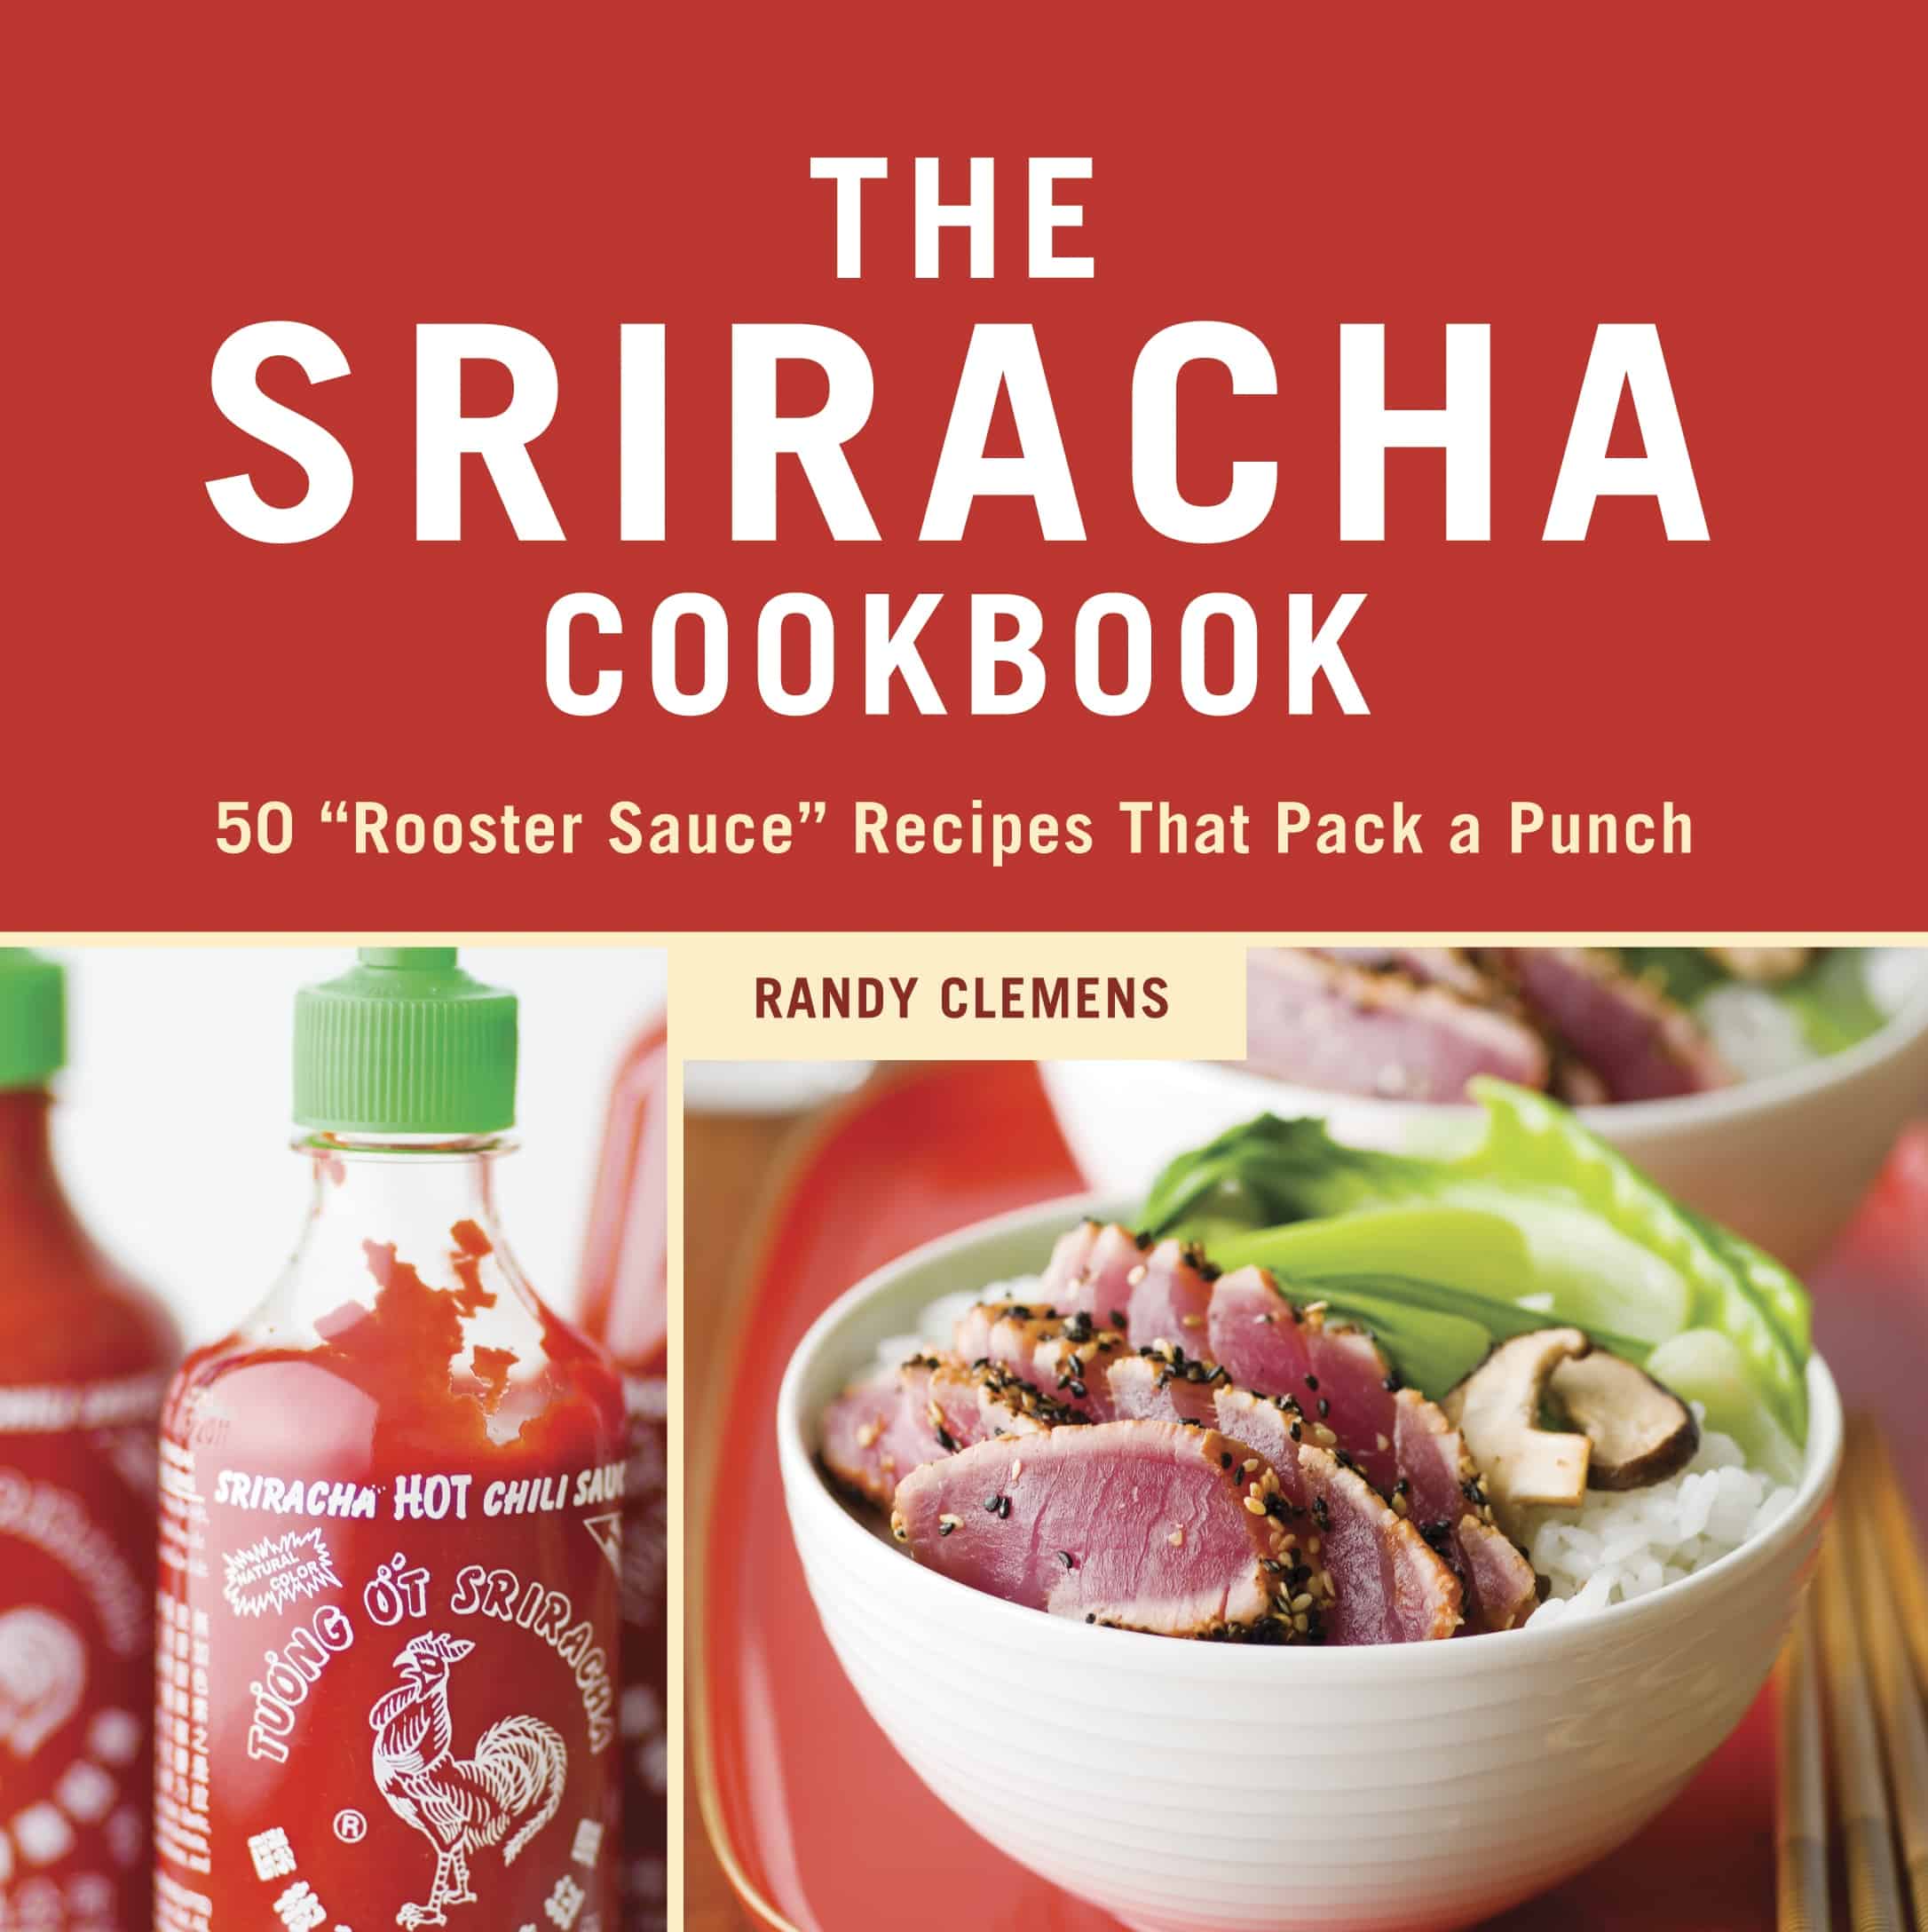 The Sriracha Cookbook 50 Rooster Sauce Recipes Book Cover Love Hot Sauce Asian Recipes